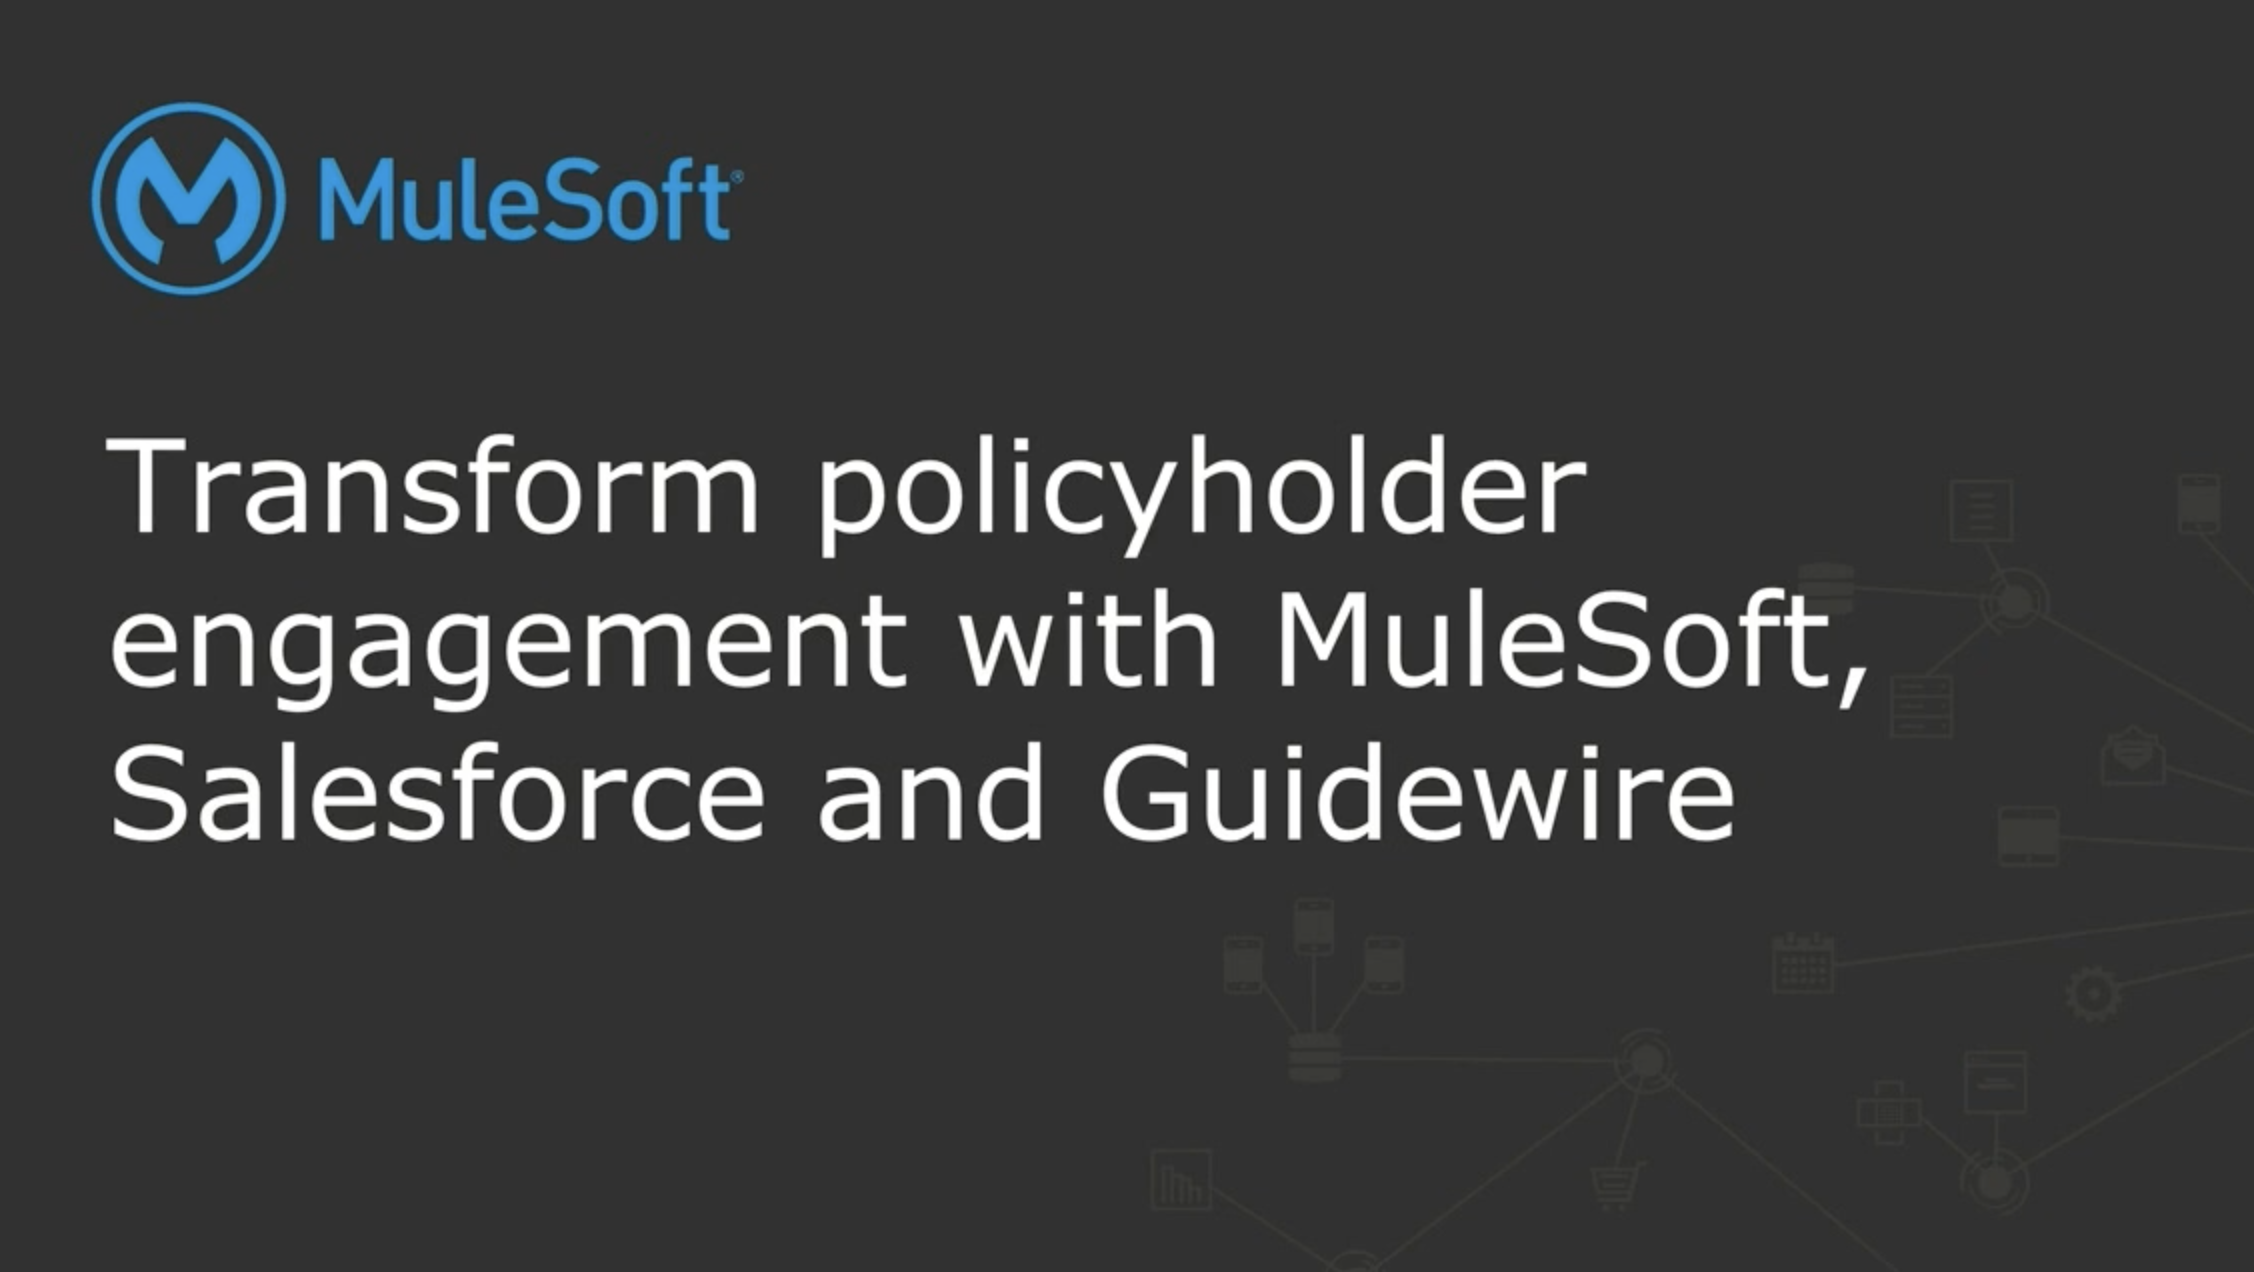 Screenshot 2020 11 14 at 14.19.19 - Webinar - Transform policyholder engagement with MuleSoft, Salesforce and Guidewire